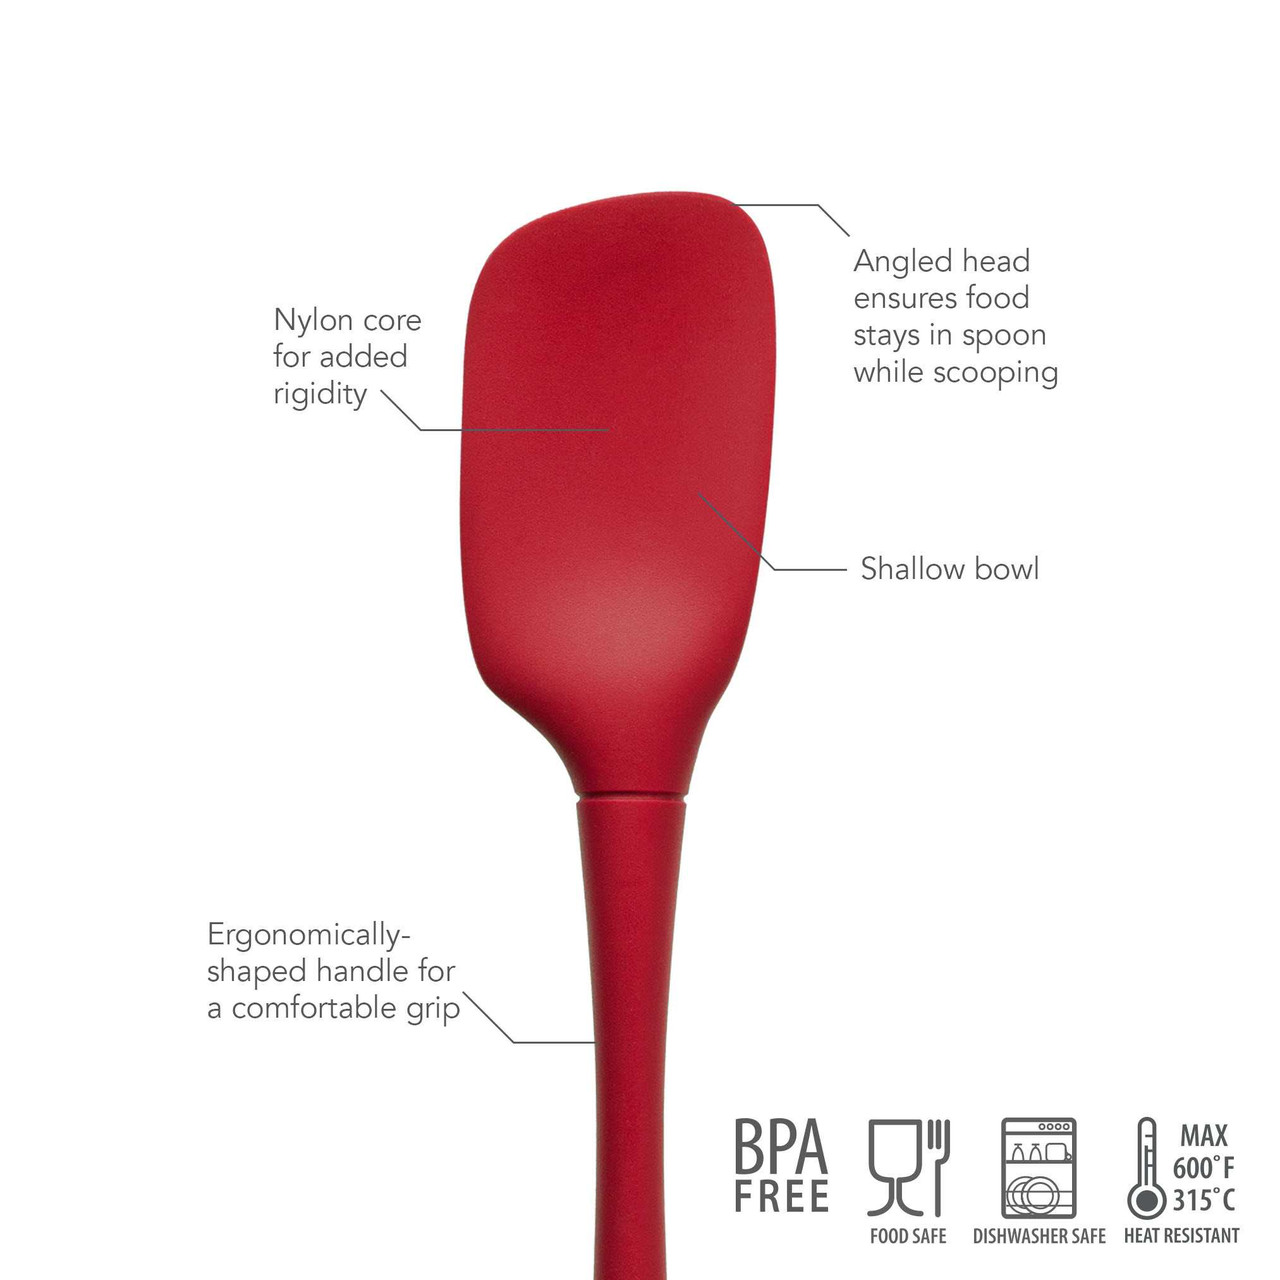 https://cdn11.bigcommerce.com/s-21kj3ntgv1/images/stencil/1280x1280/products/648/2884/Tovolo-Flex-Core-All-Silicone-Spoonula-with-features__36312.1676674797.jpg?c=2